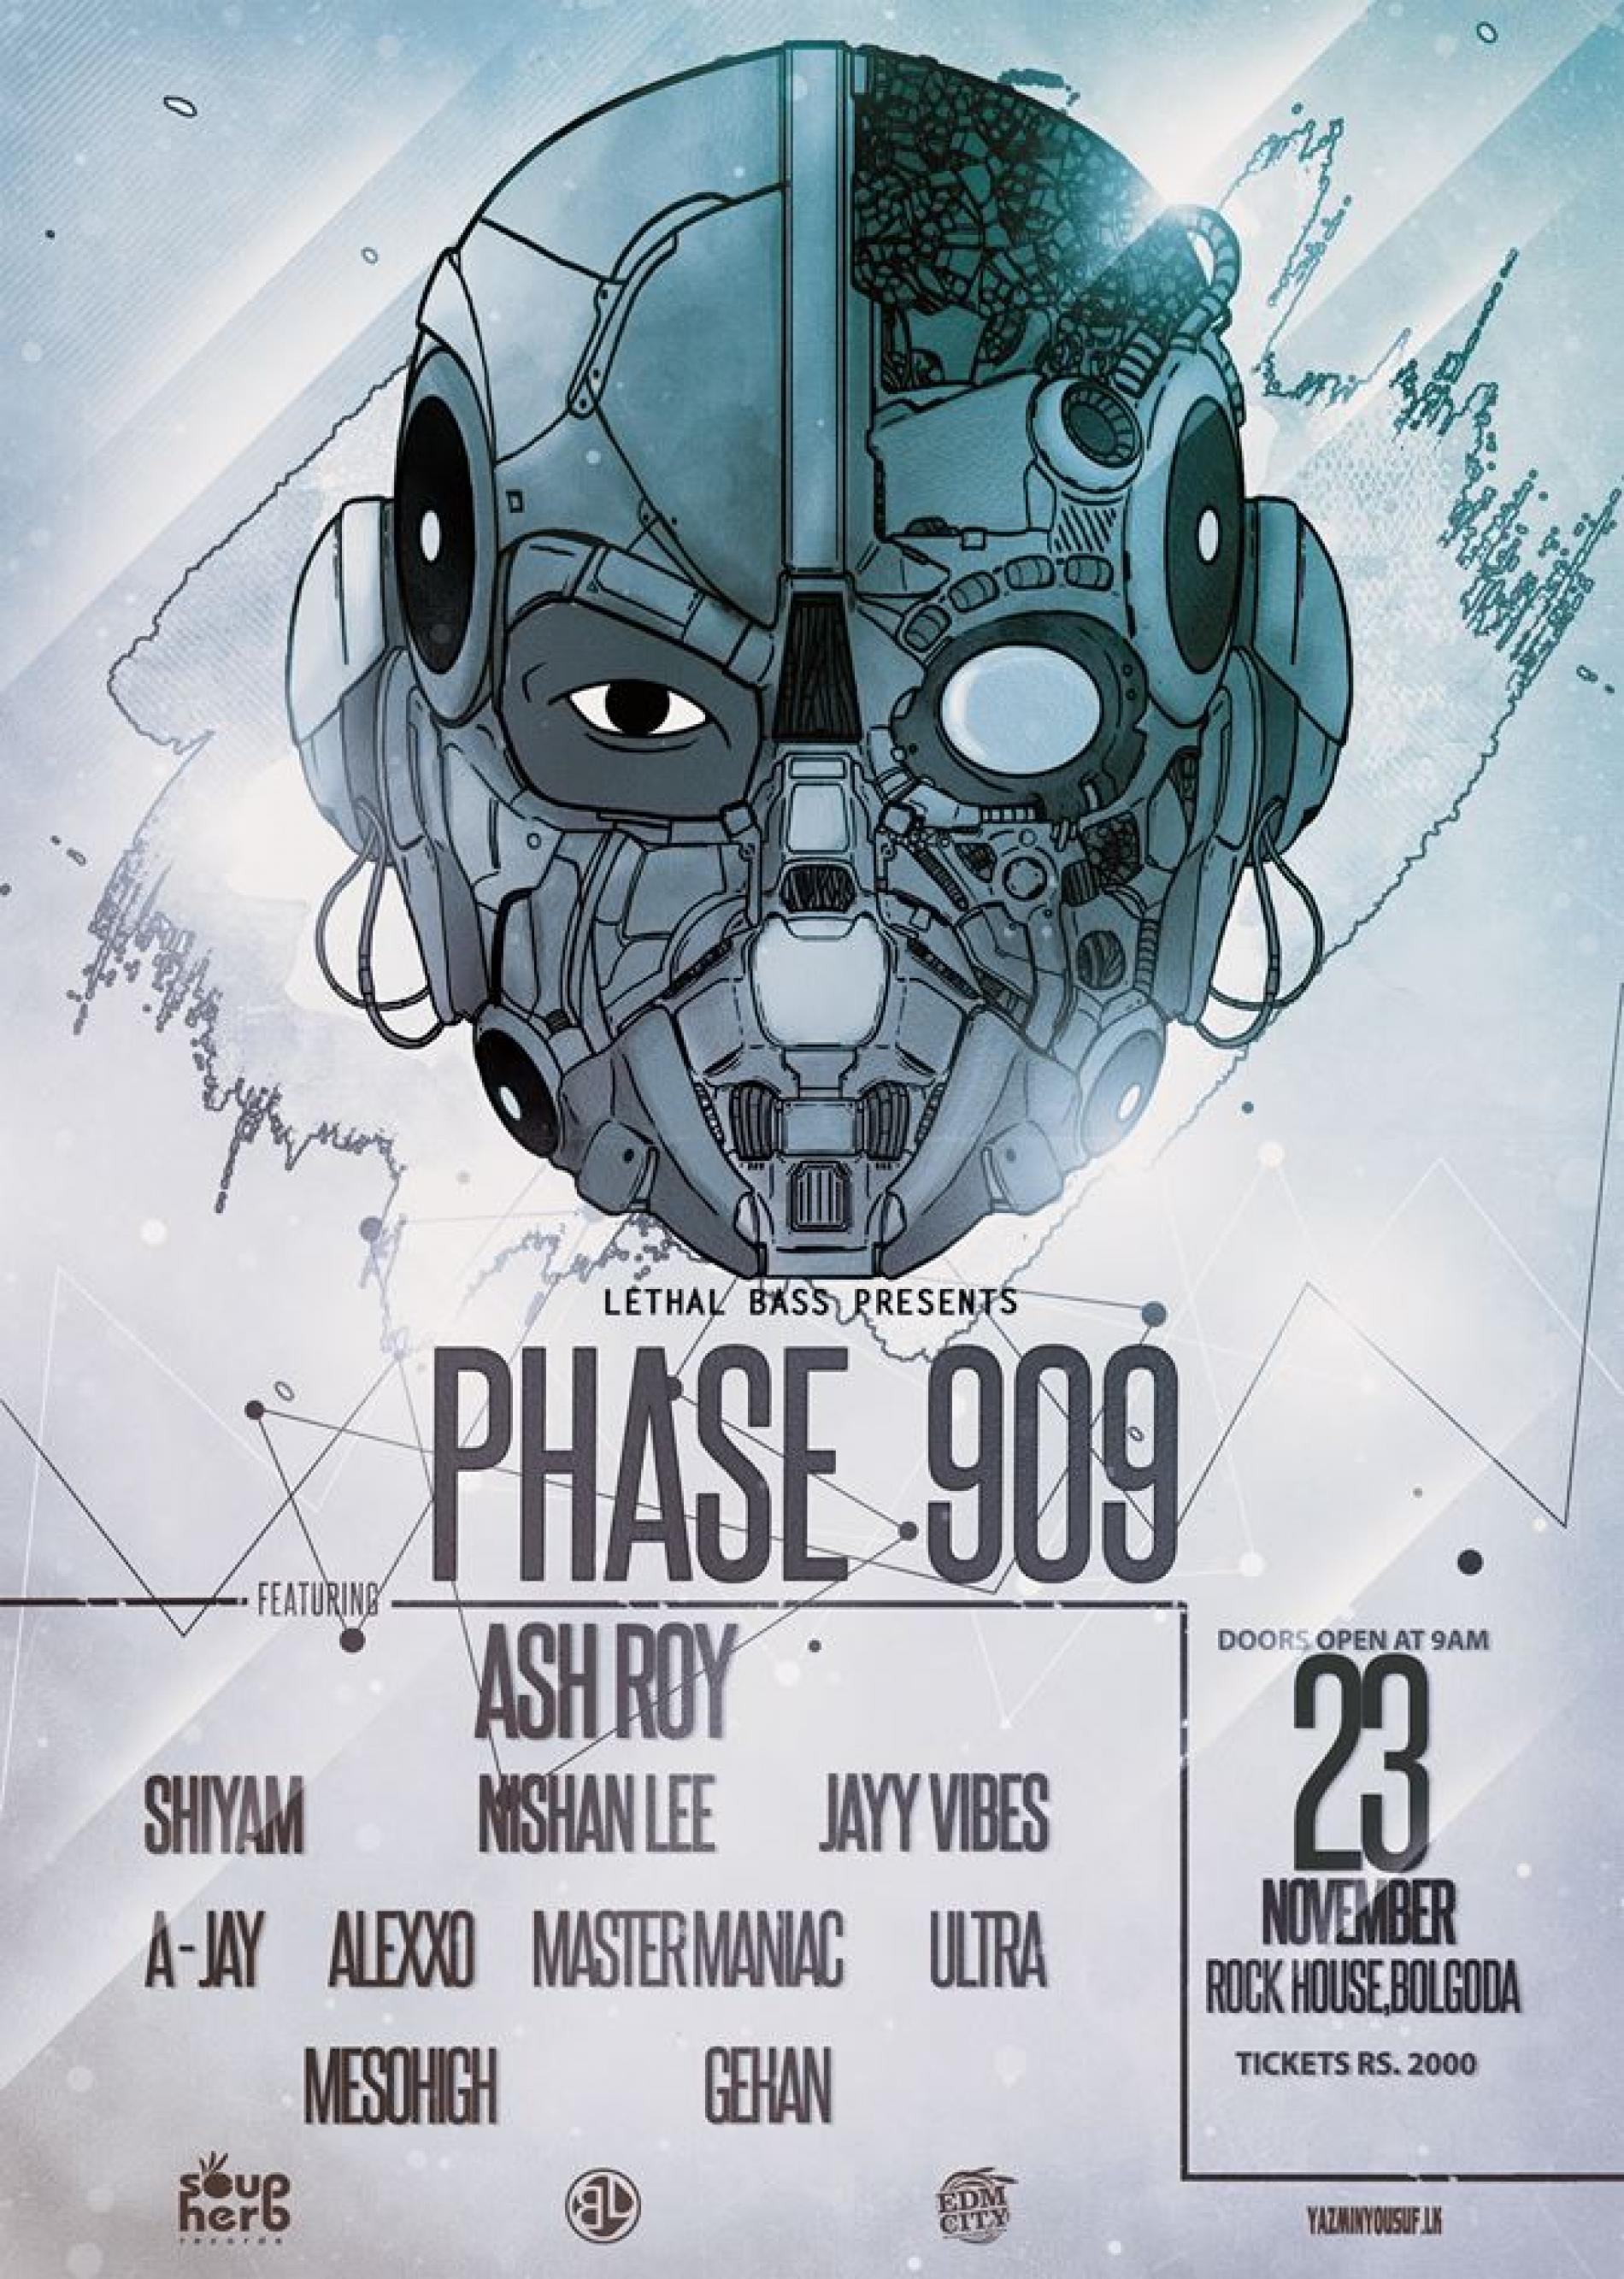 PHASE 909 Featuring Ash Roy